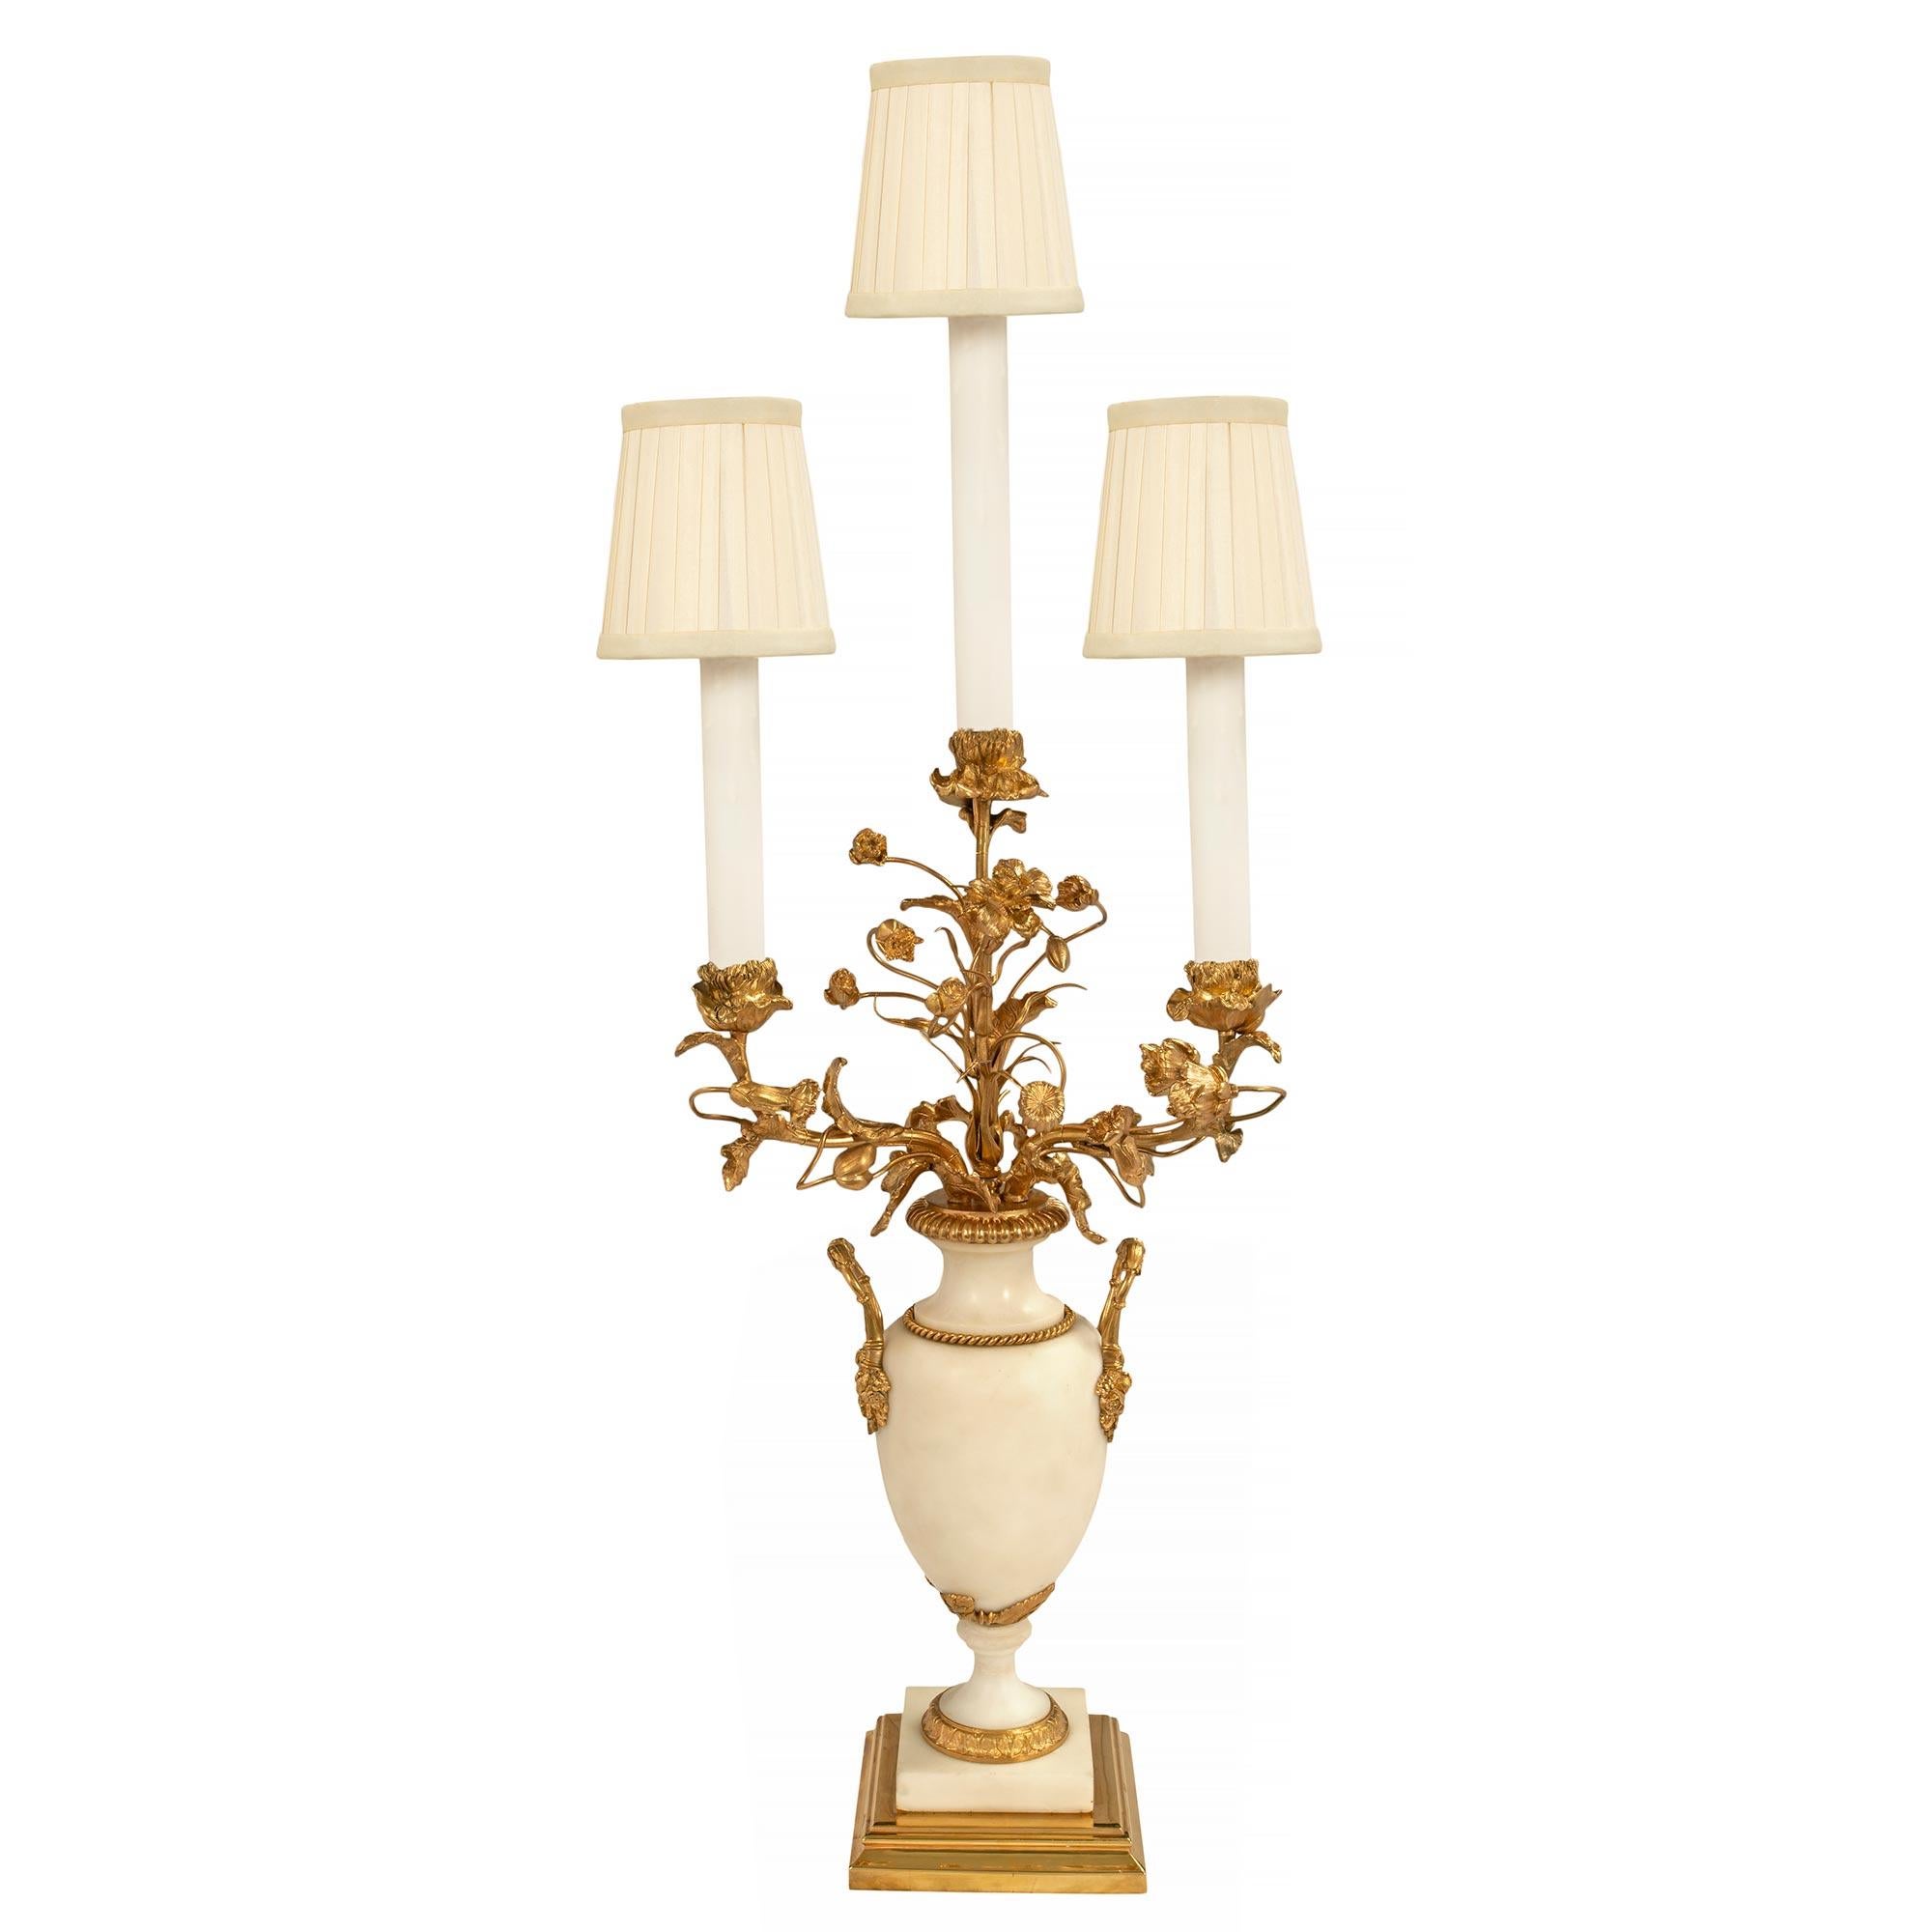 A most attractive pair of French mid 19th century Louis XVI st. white Carrara marble and ormolu mounted electrified candelabras. The pair are raised by square mottled ormolu and marble bases. Above, the socles are elegantly decorated by a coeur de